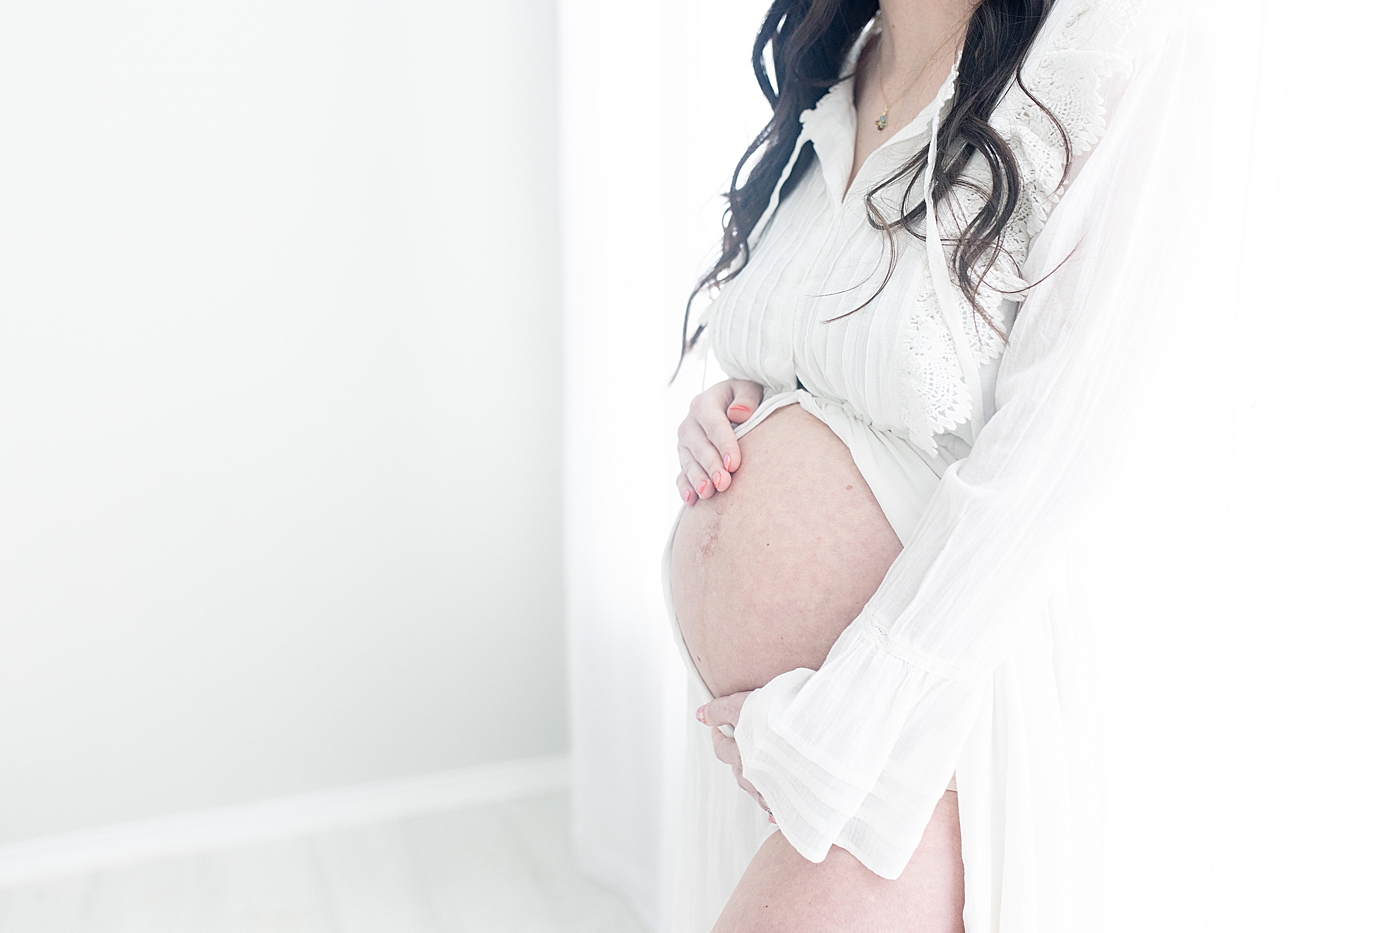 Maternity portraits of Mom embracing her pregnant belly. Photo by Little Sunshine Photography.